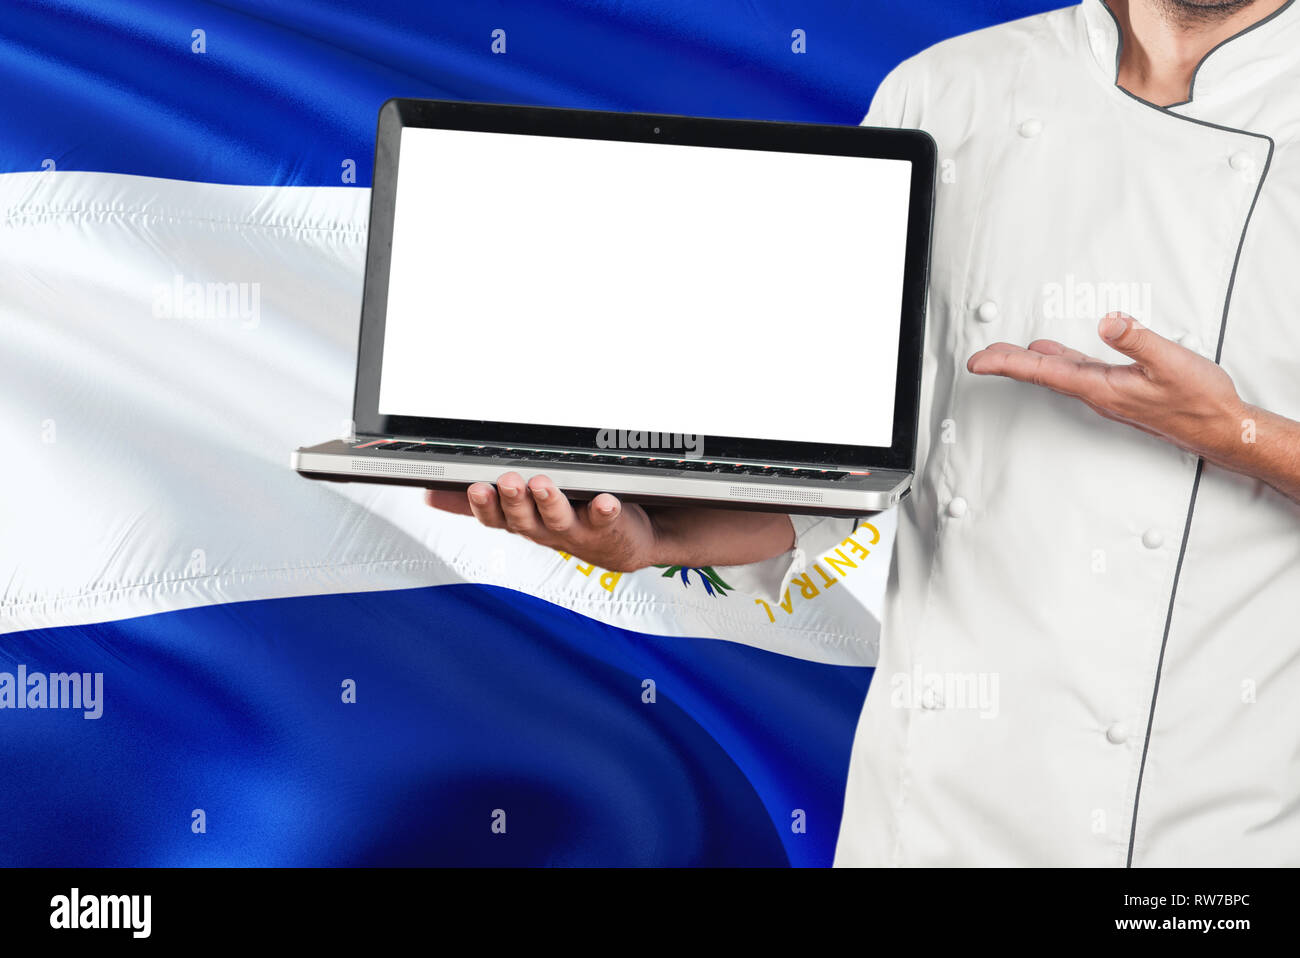 Salvadoran Chef holding laptop with blank screen on El Salvador flag background. Cook wearing uniform and pointing laptop for copy space. Stock Photo